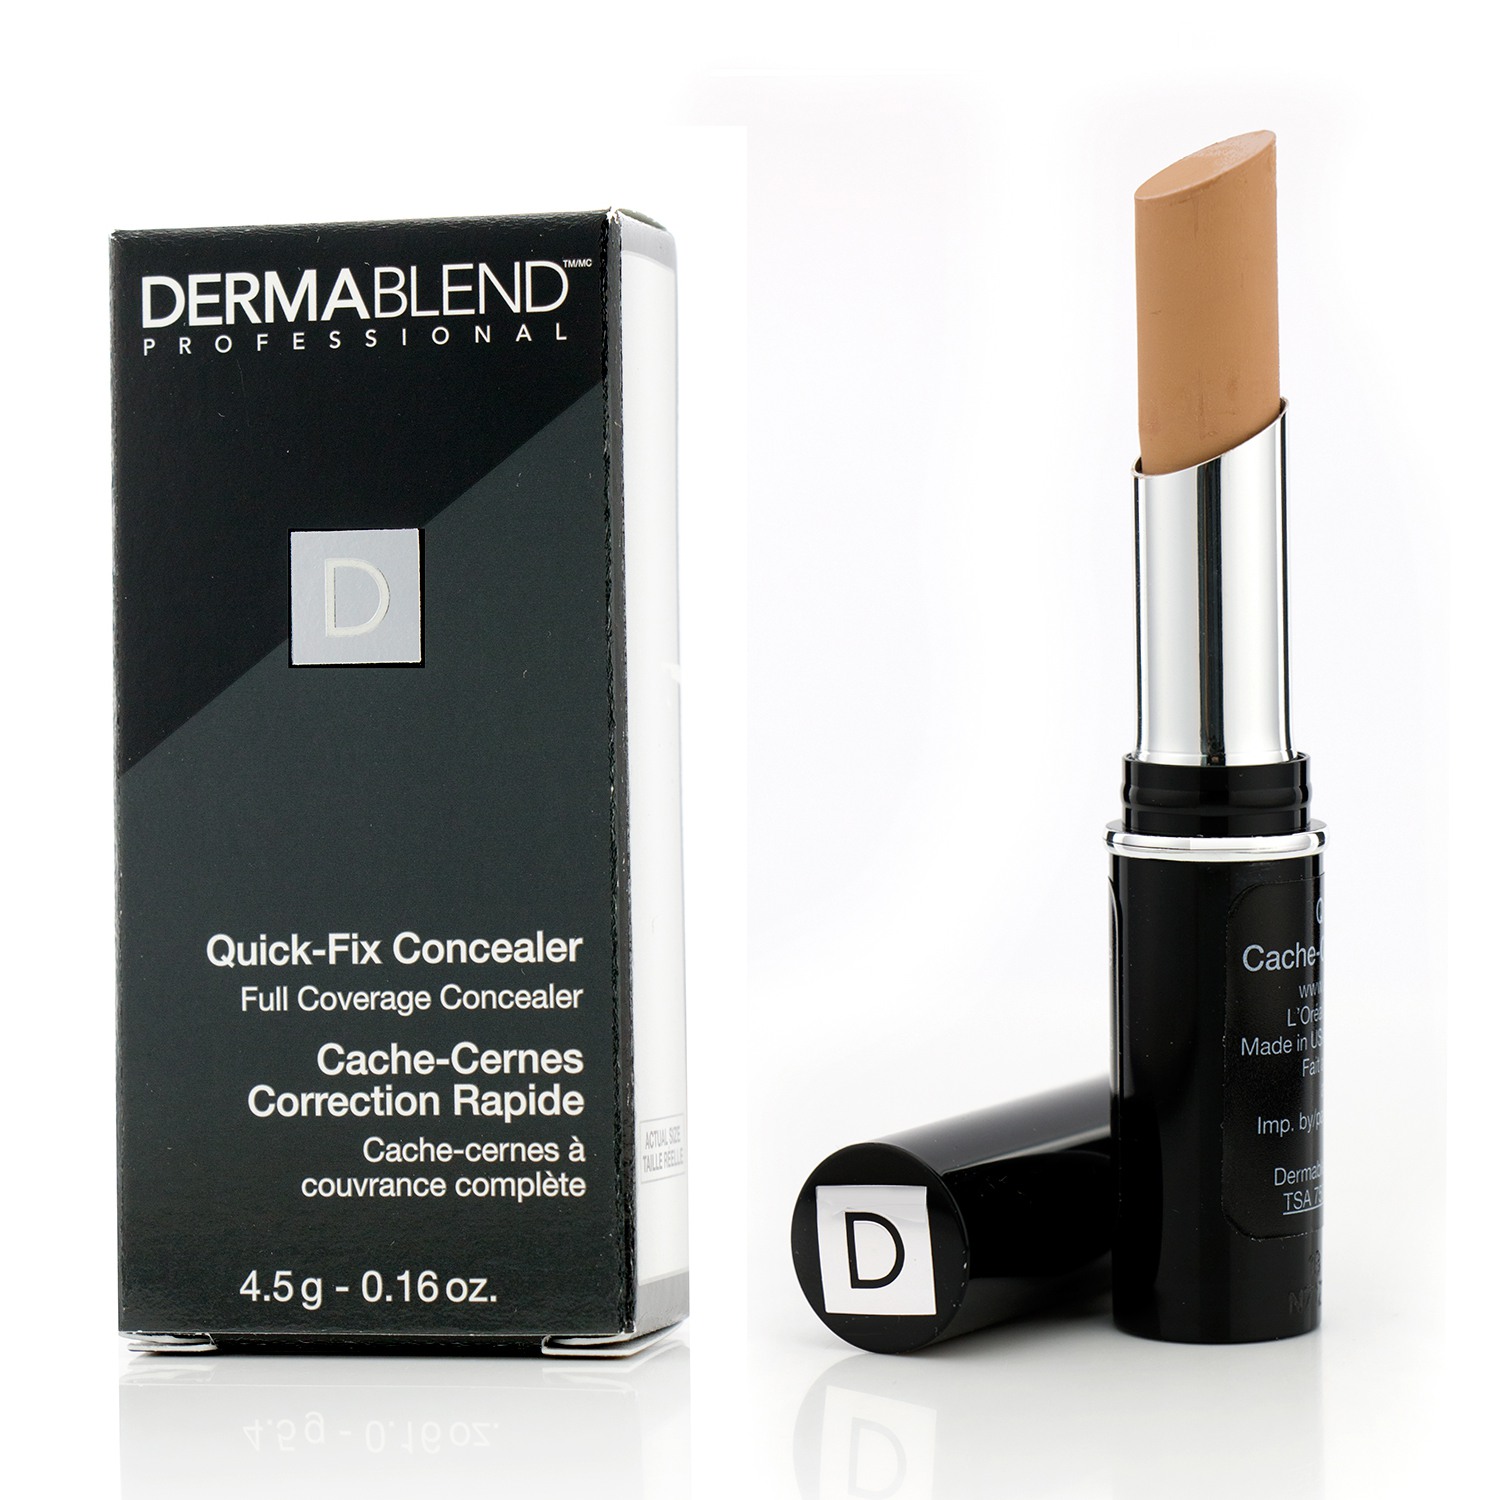 Quick Fix Concealer (High Coverage) - Tan (35W) Dermablend Image